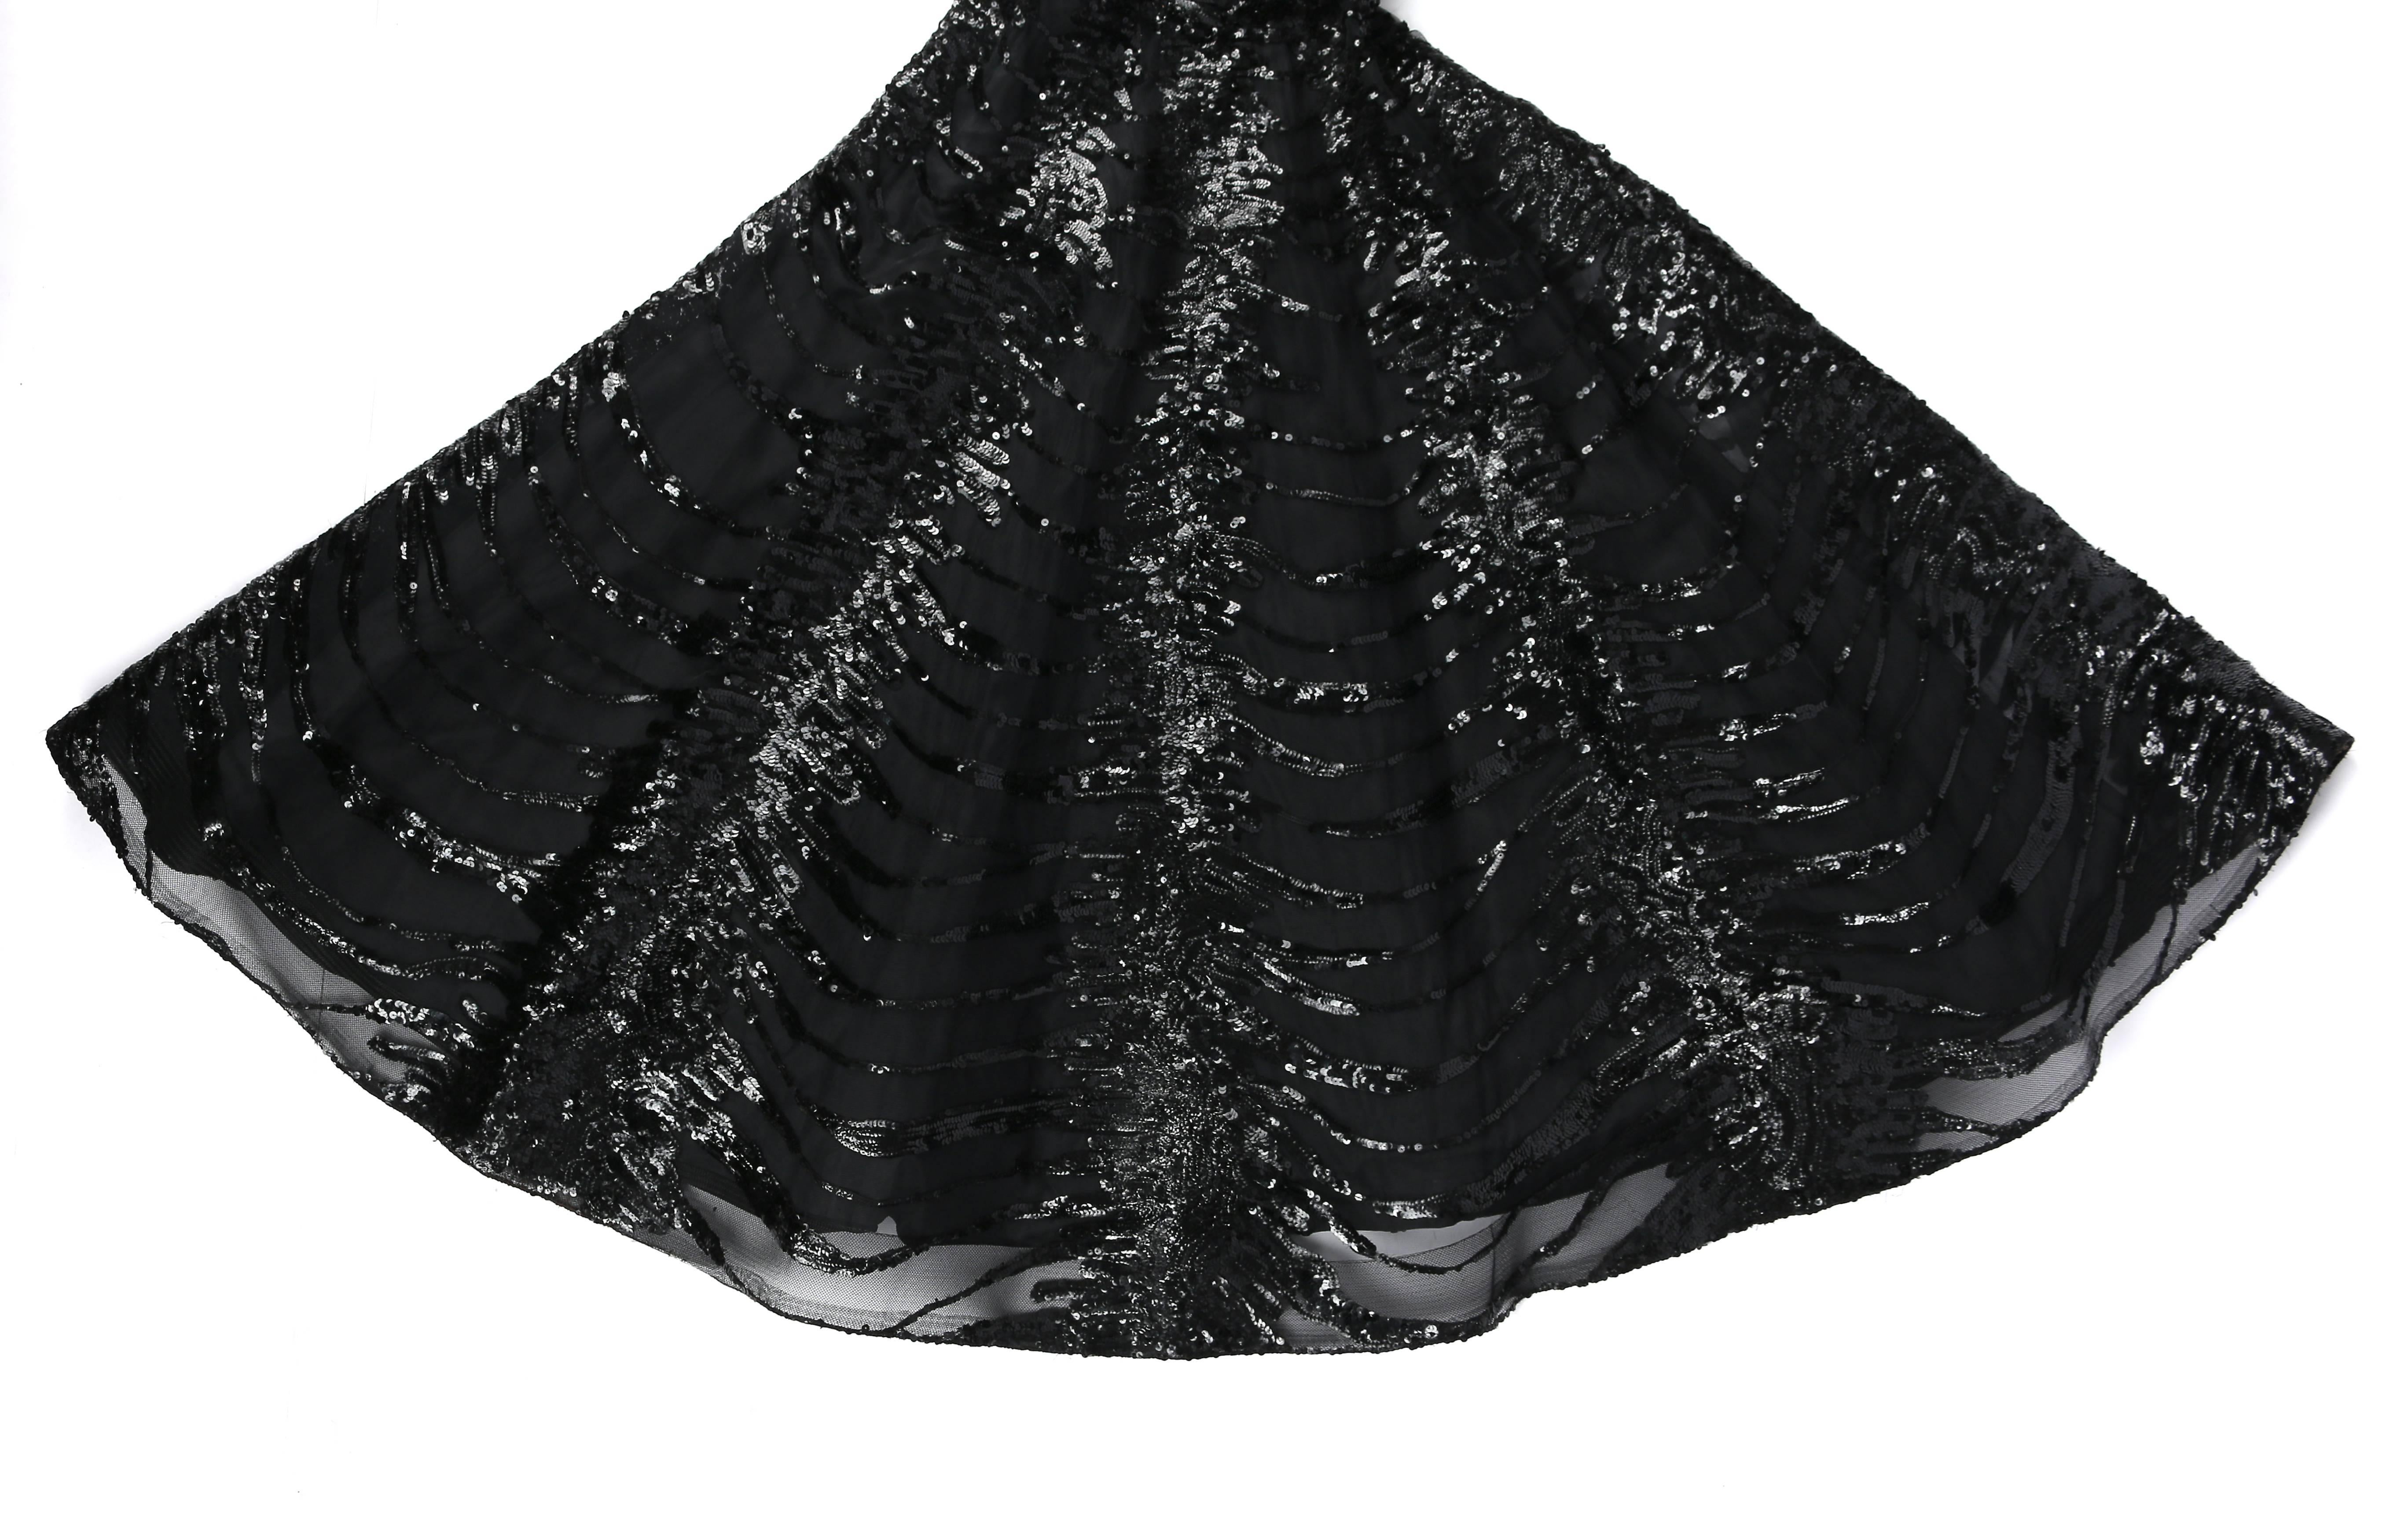 HAUTE COUTURE 1950s Black Sequin Ball Gown Evening Theater Opera Party Dress For Sale 1